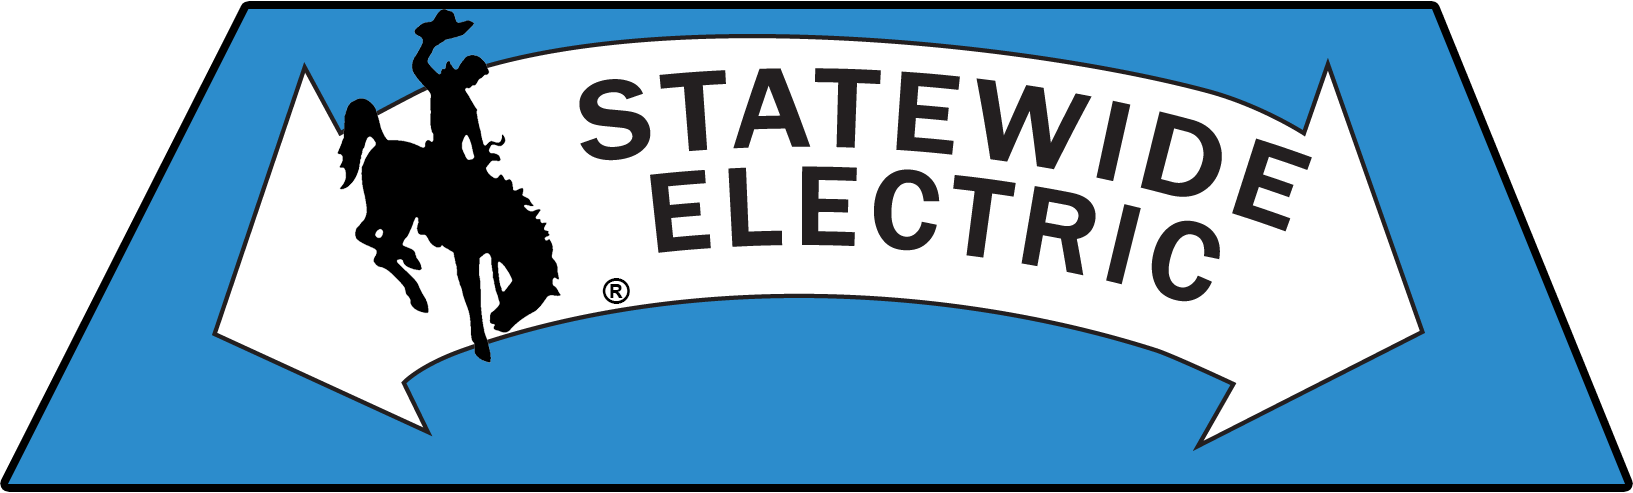 Statewide Electric